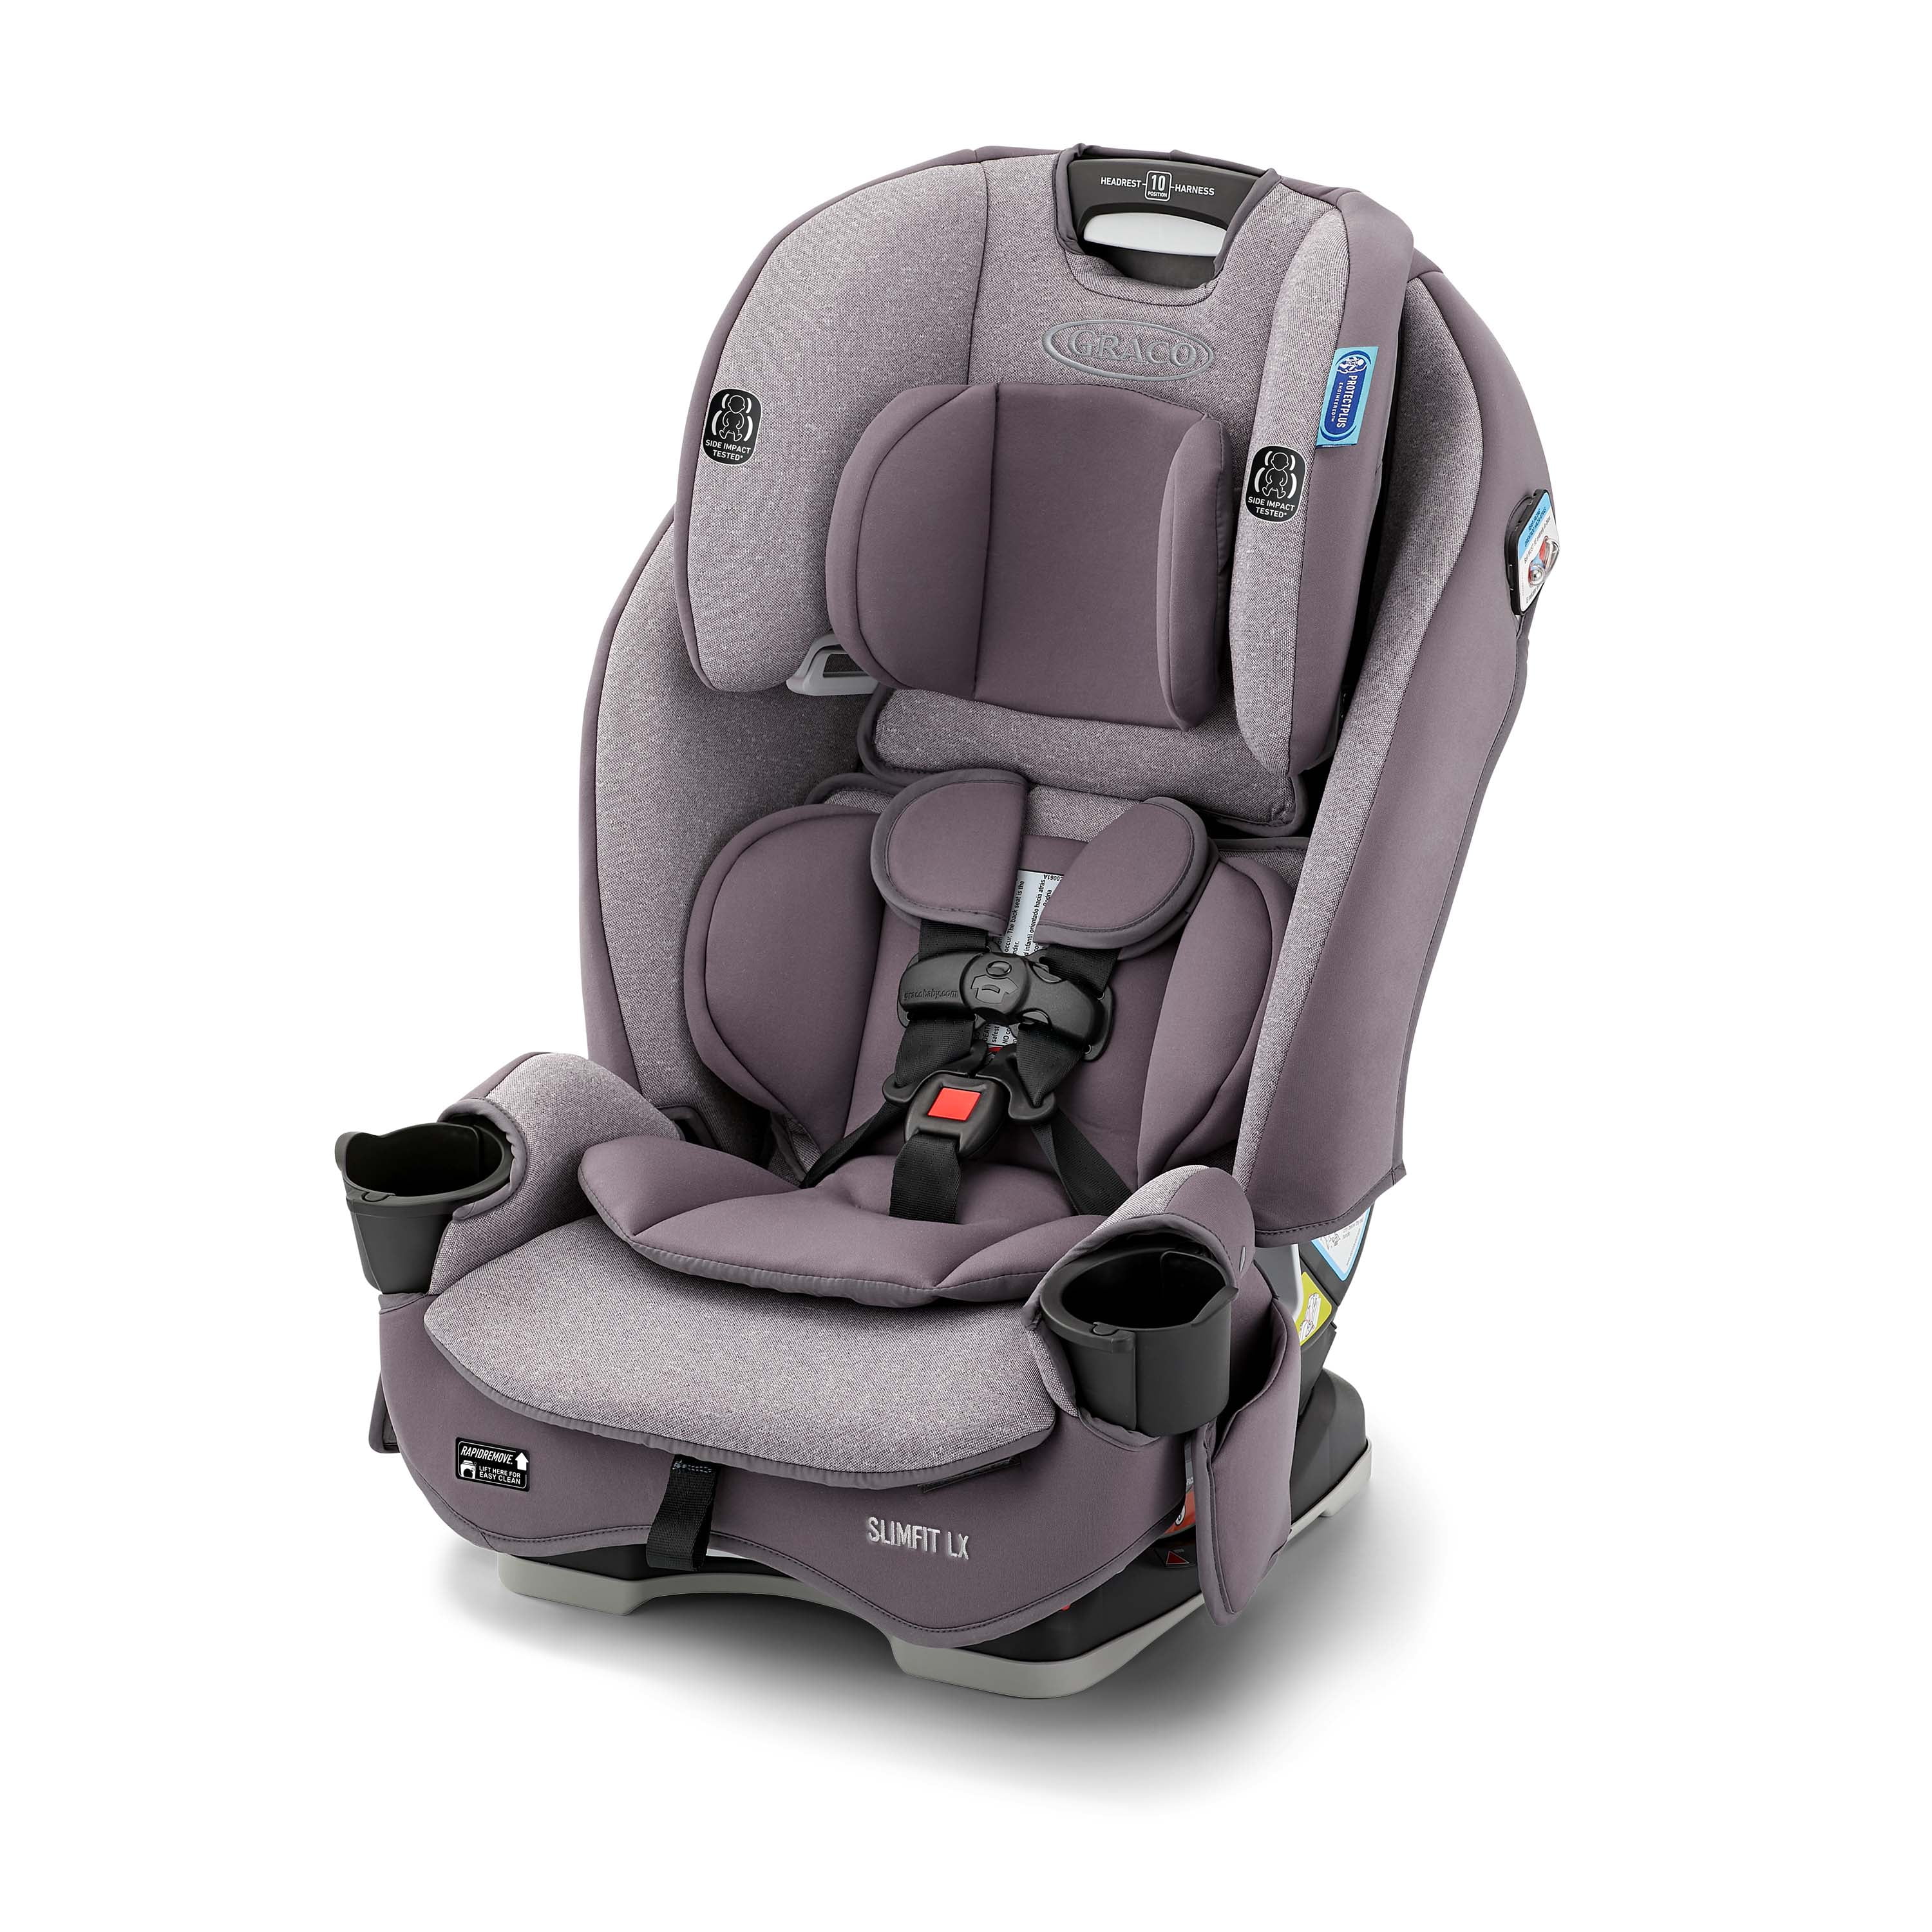 Graco SlimFit3 LX 3-in-1 All-in-One Car Seat with Space-Saving